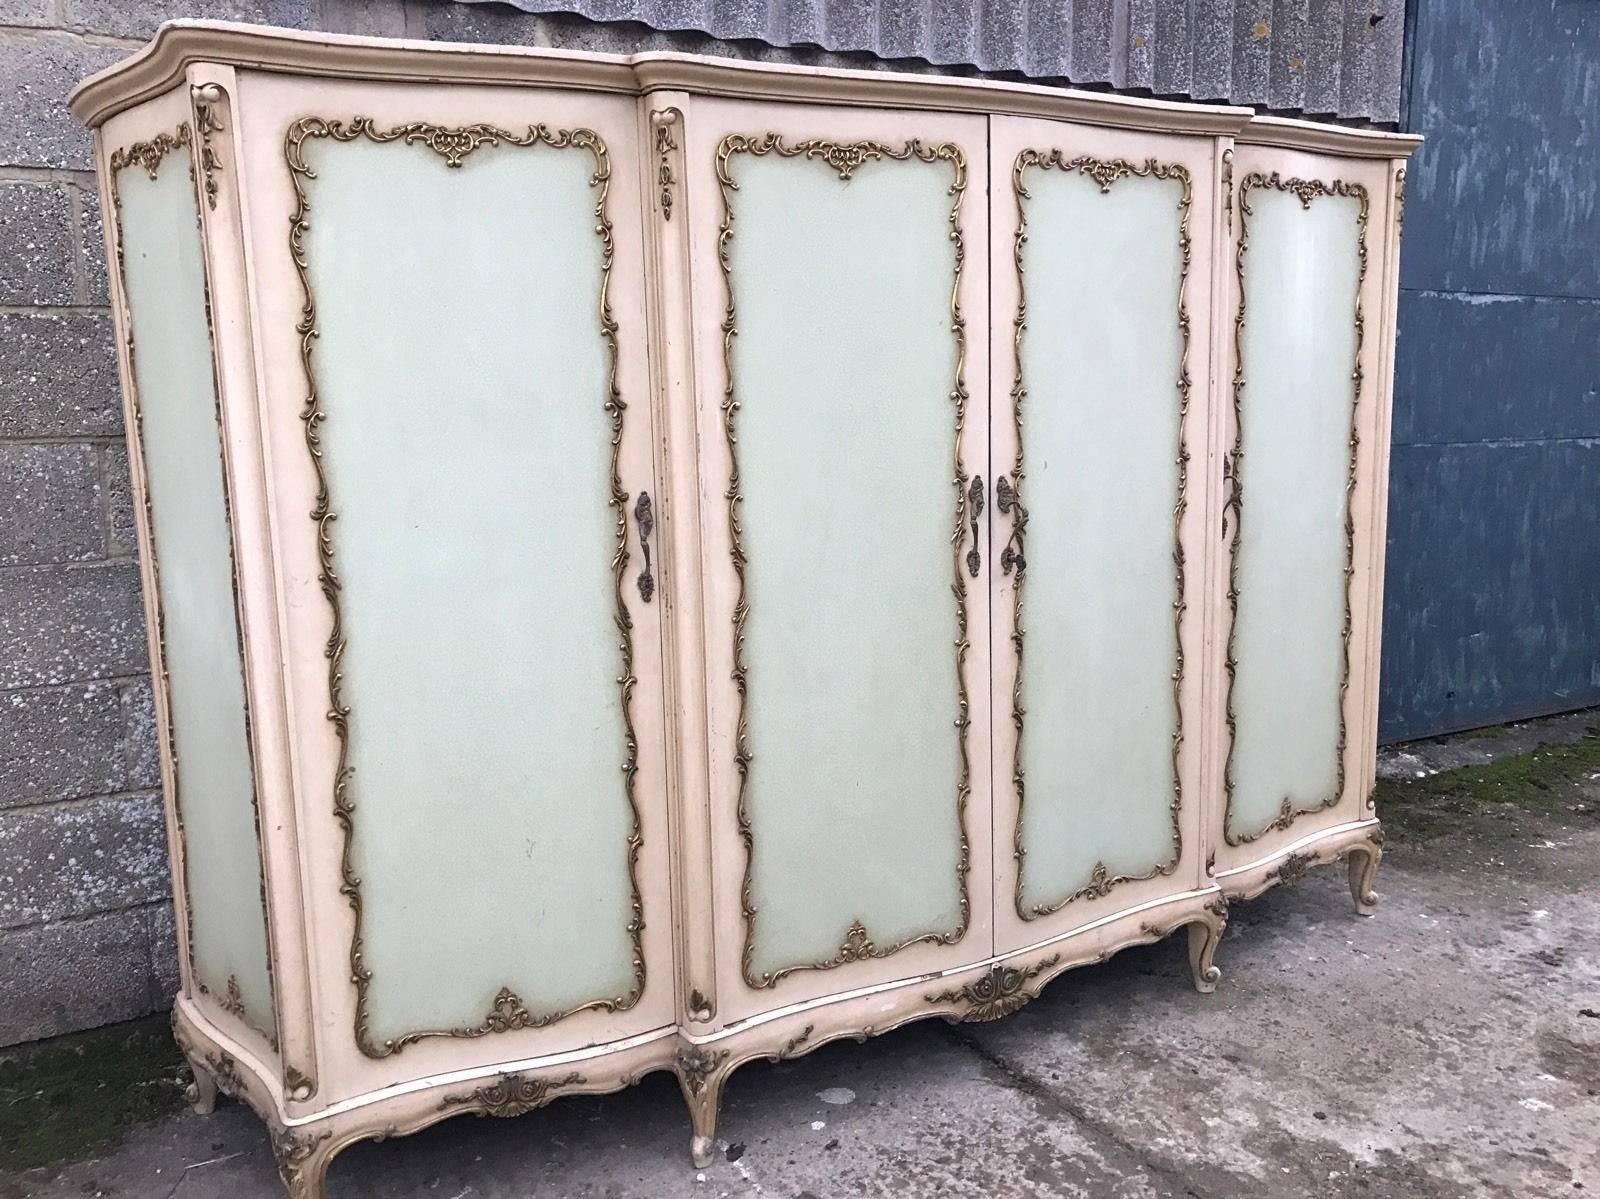 This is a very rare four-door, serpentine French armoire. Very hard to come by, rarely seen for sale anywhere in the world! 

With its original paint and original floral paint work, it really is a one off. 

Dimensions: 275cm wide, 182cm tall,